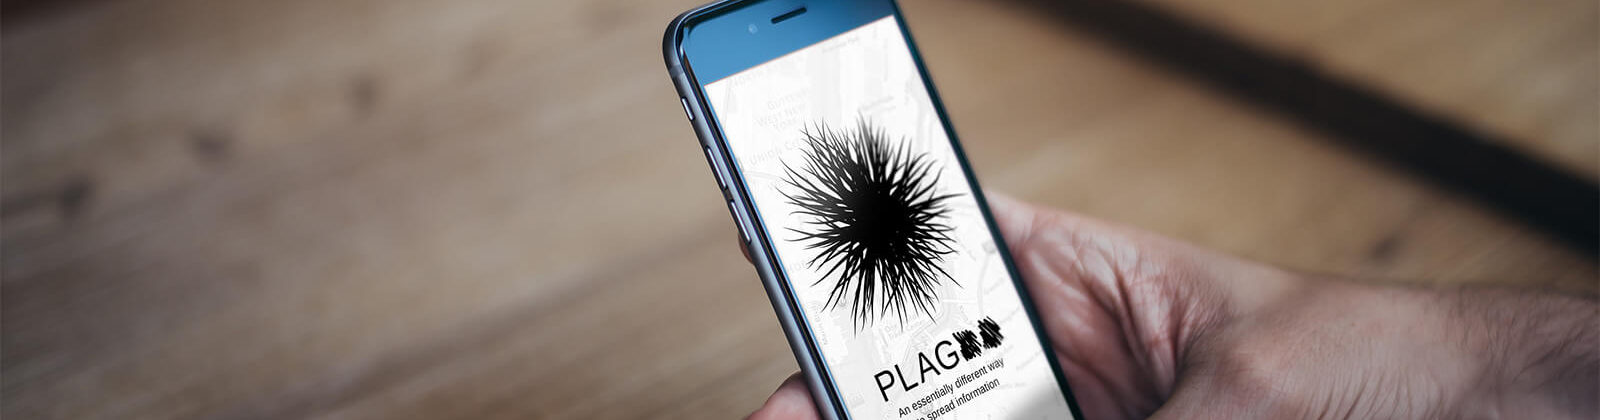 Startup of the Week: Plag